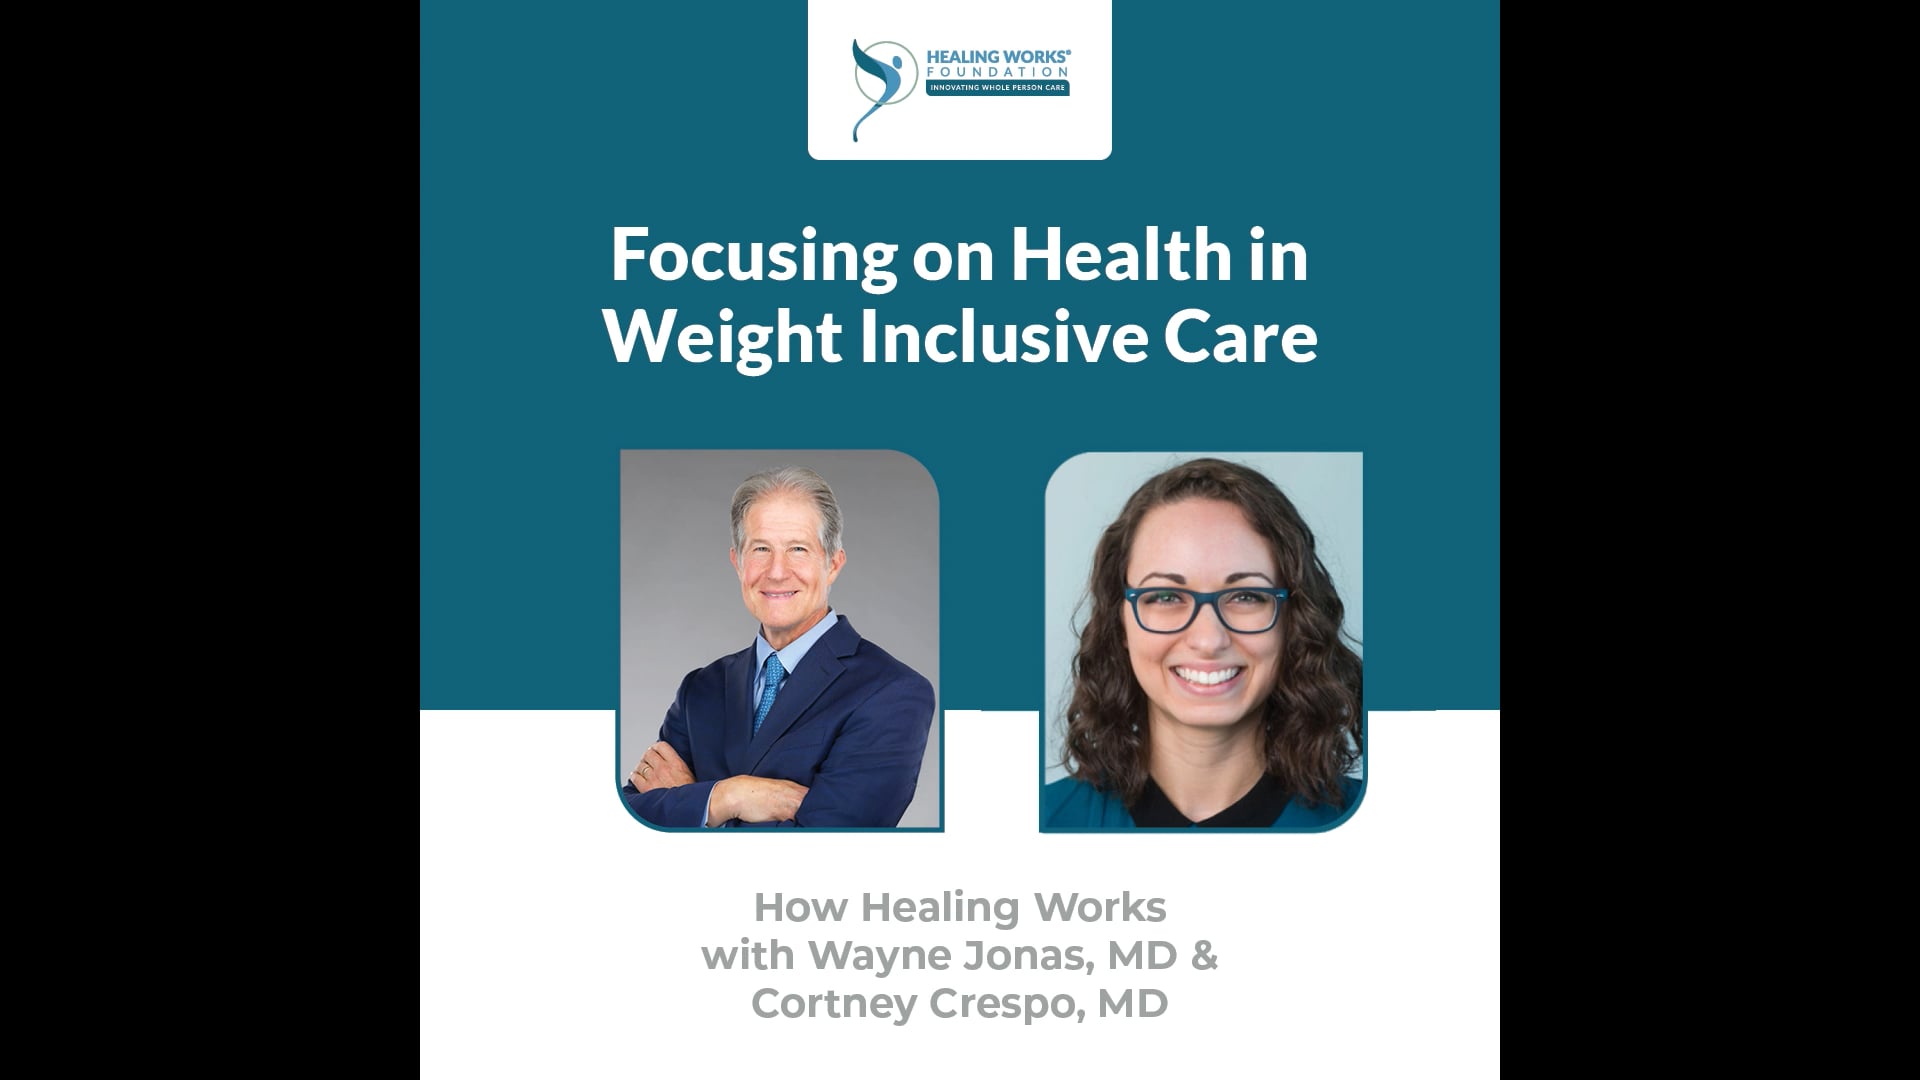 Focusing on Health in Weight Inclusive Care